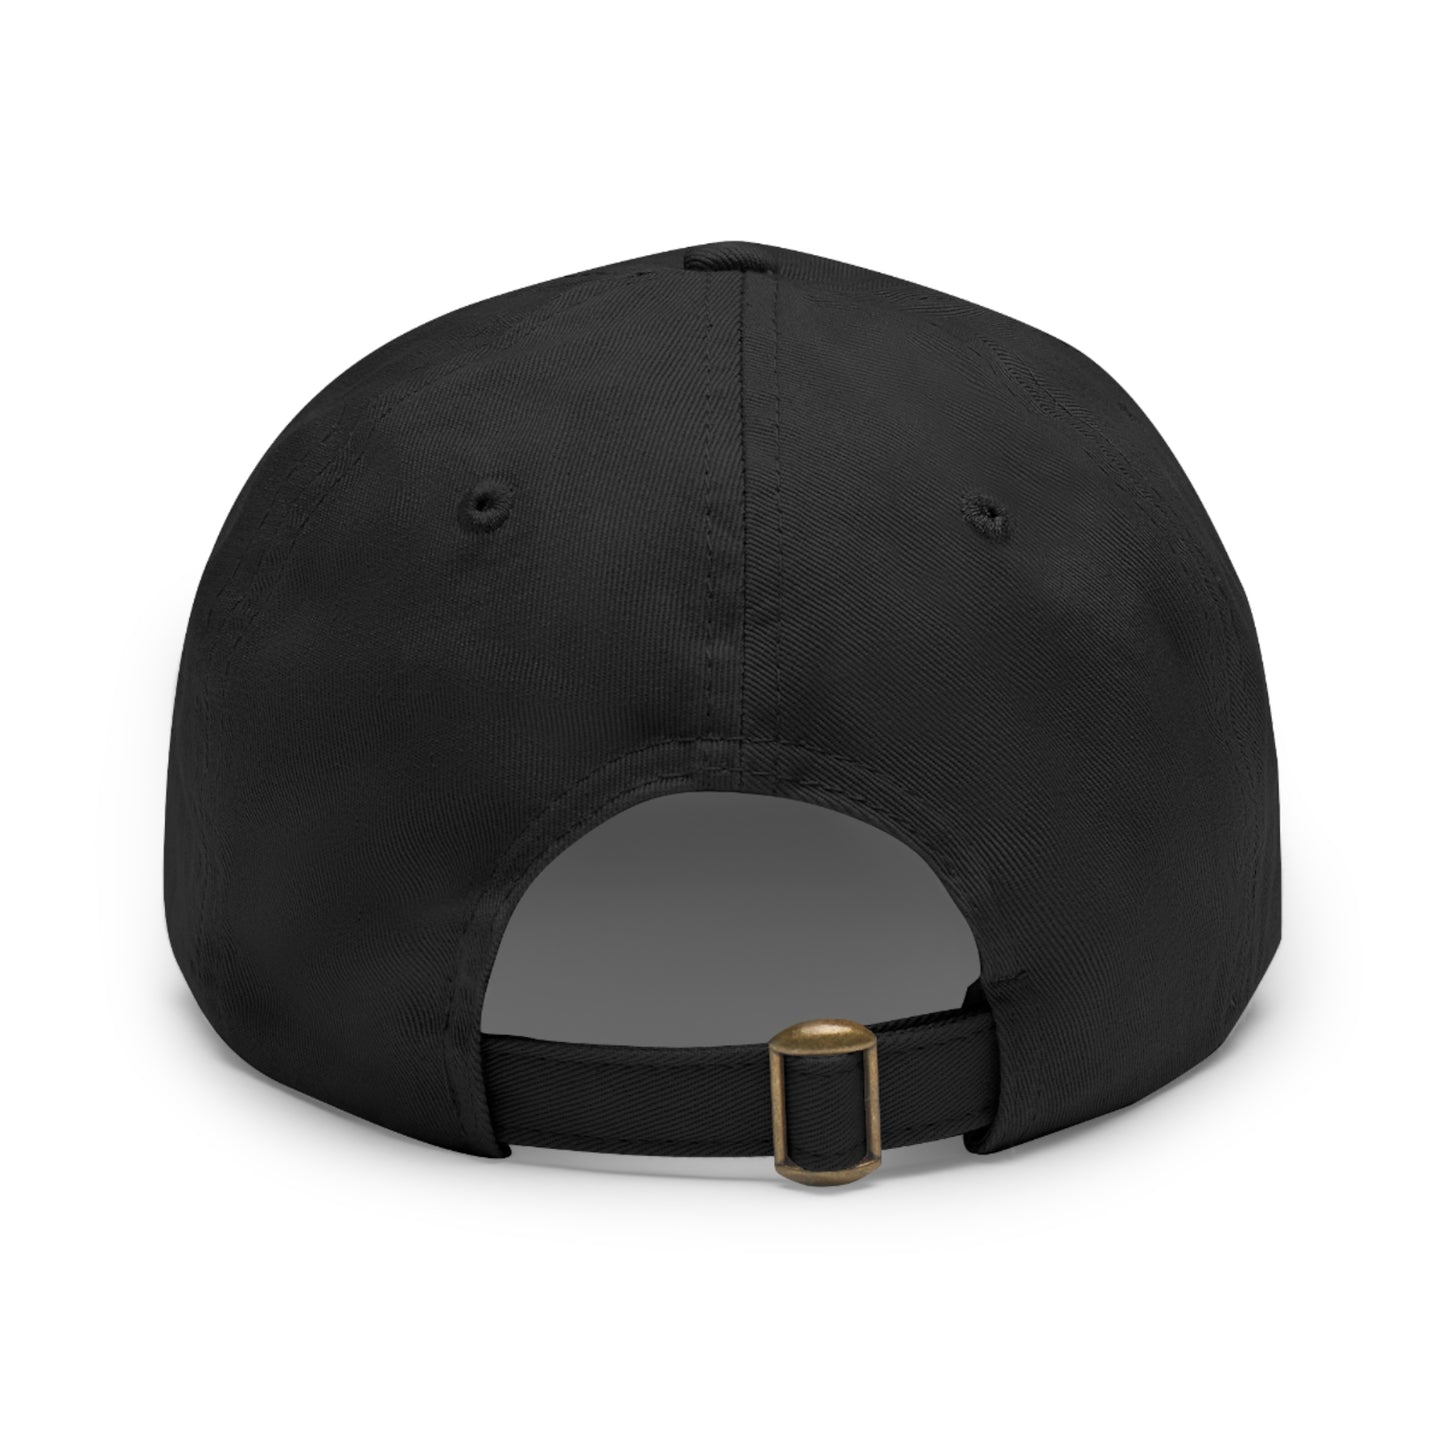 New Jersey Dad Hat with Leather Patch